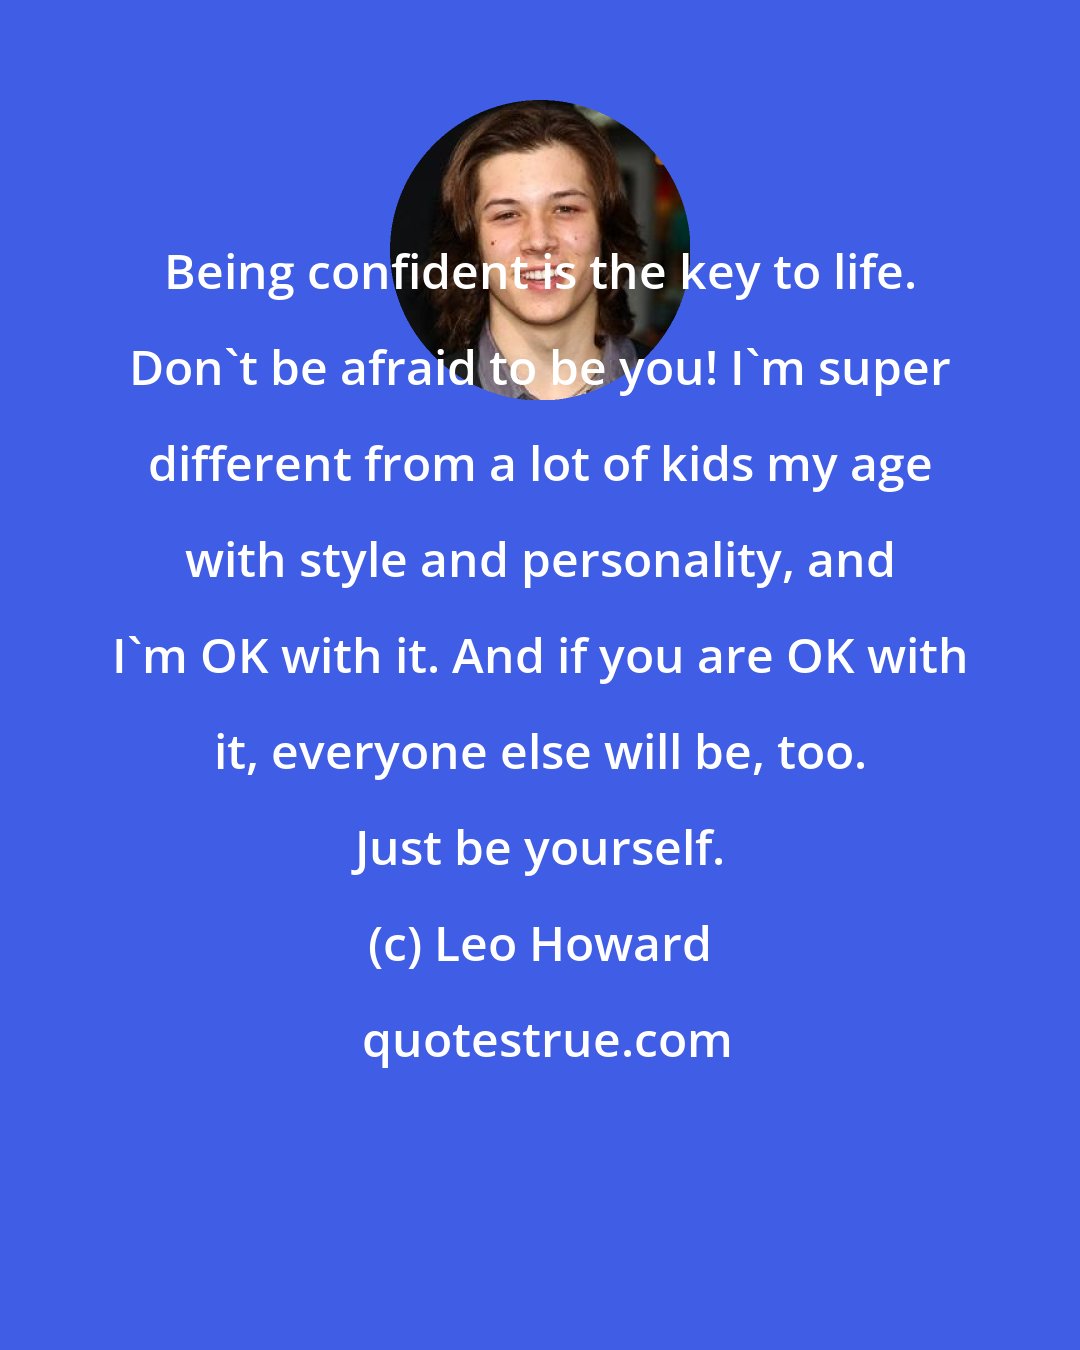 Leo Howard: Being confident is the key to life. Don't be afraid to be you! I'm super different from a lot of kids my age with style and personality, and I'm OK with it. And if you are OK with it, everyone else will be, too. Just be yourself.